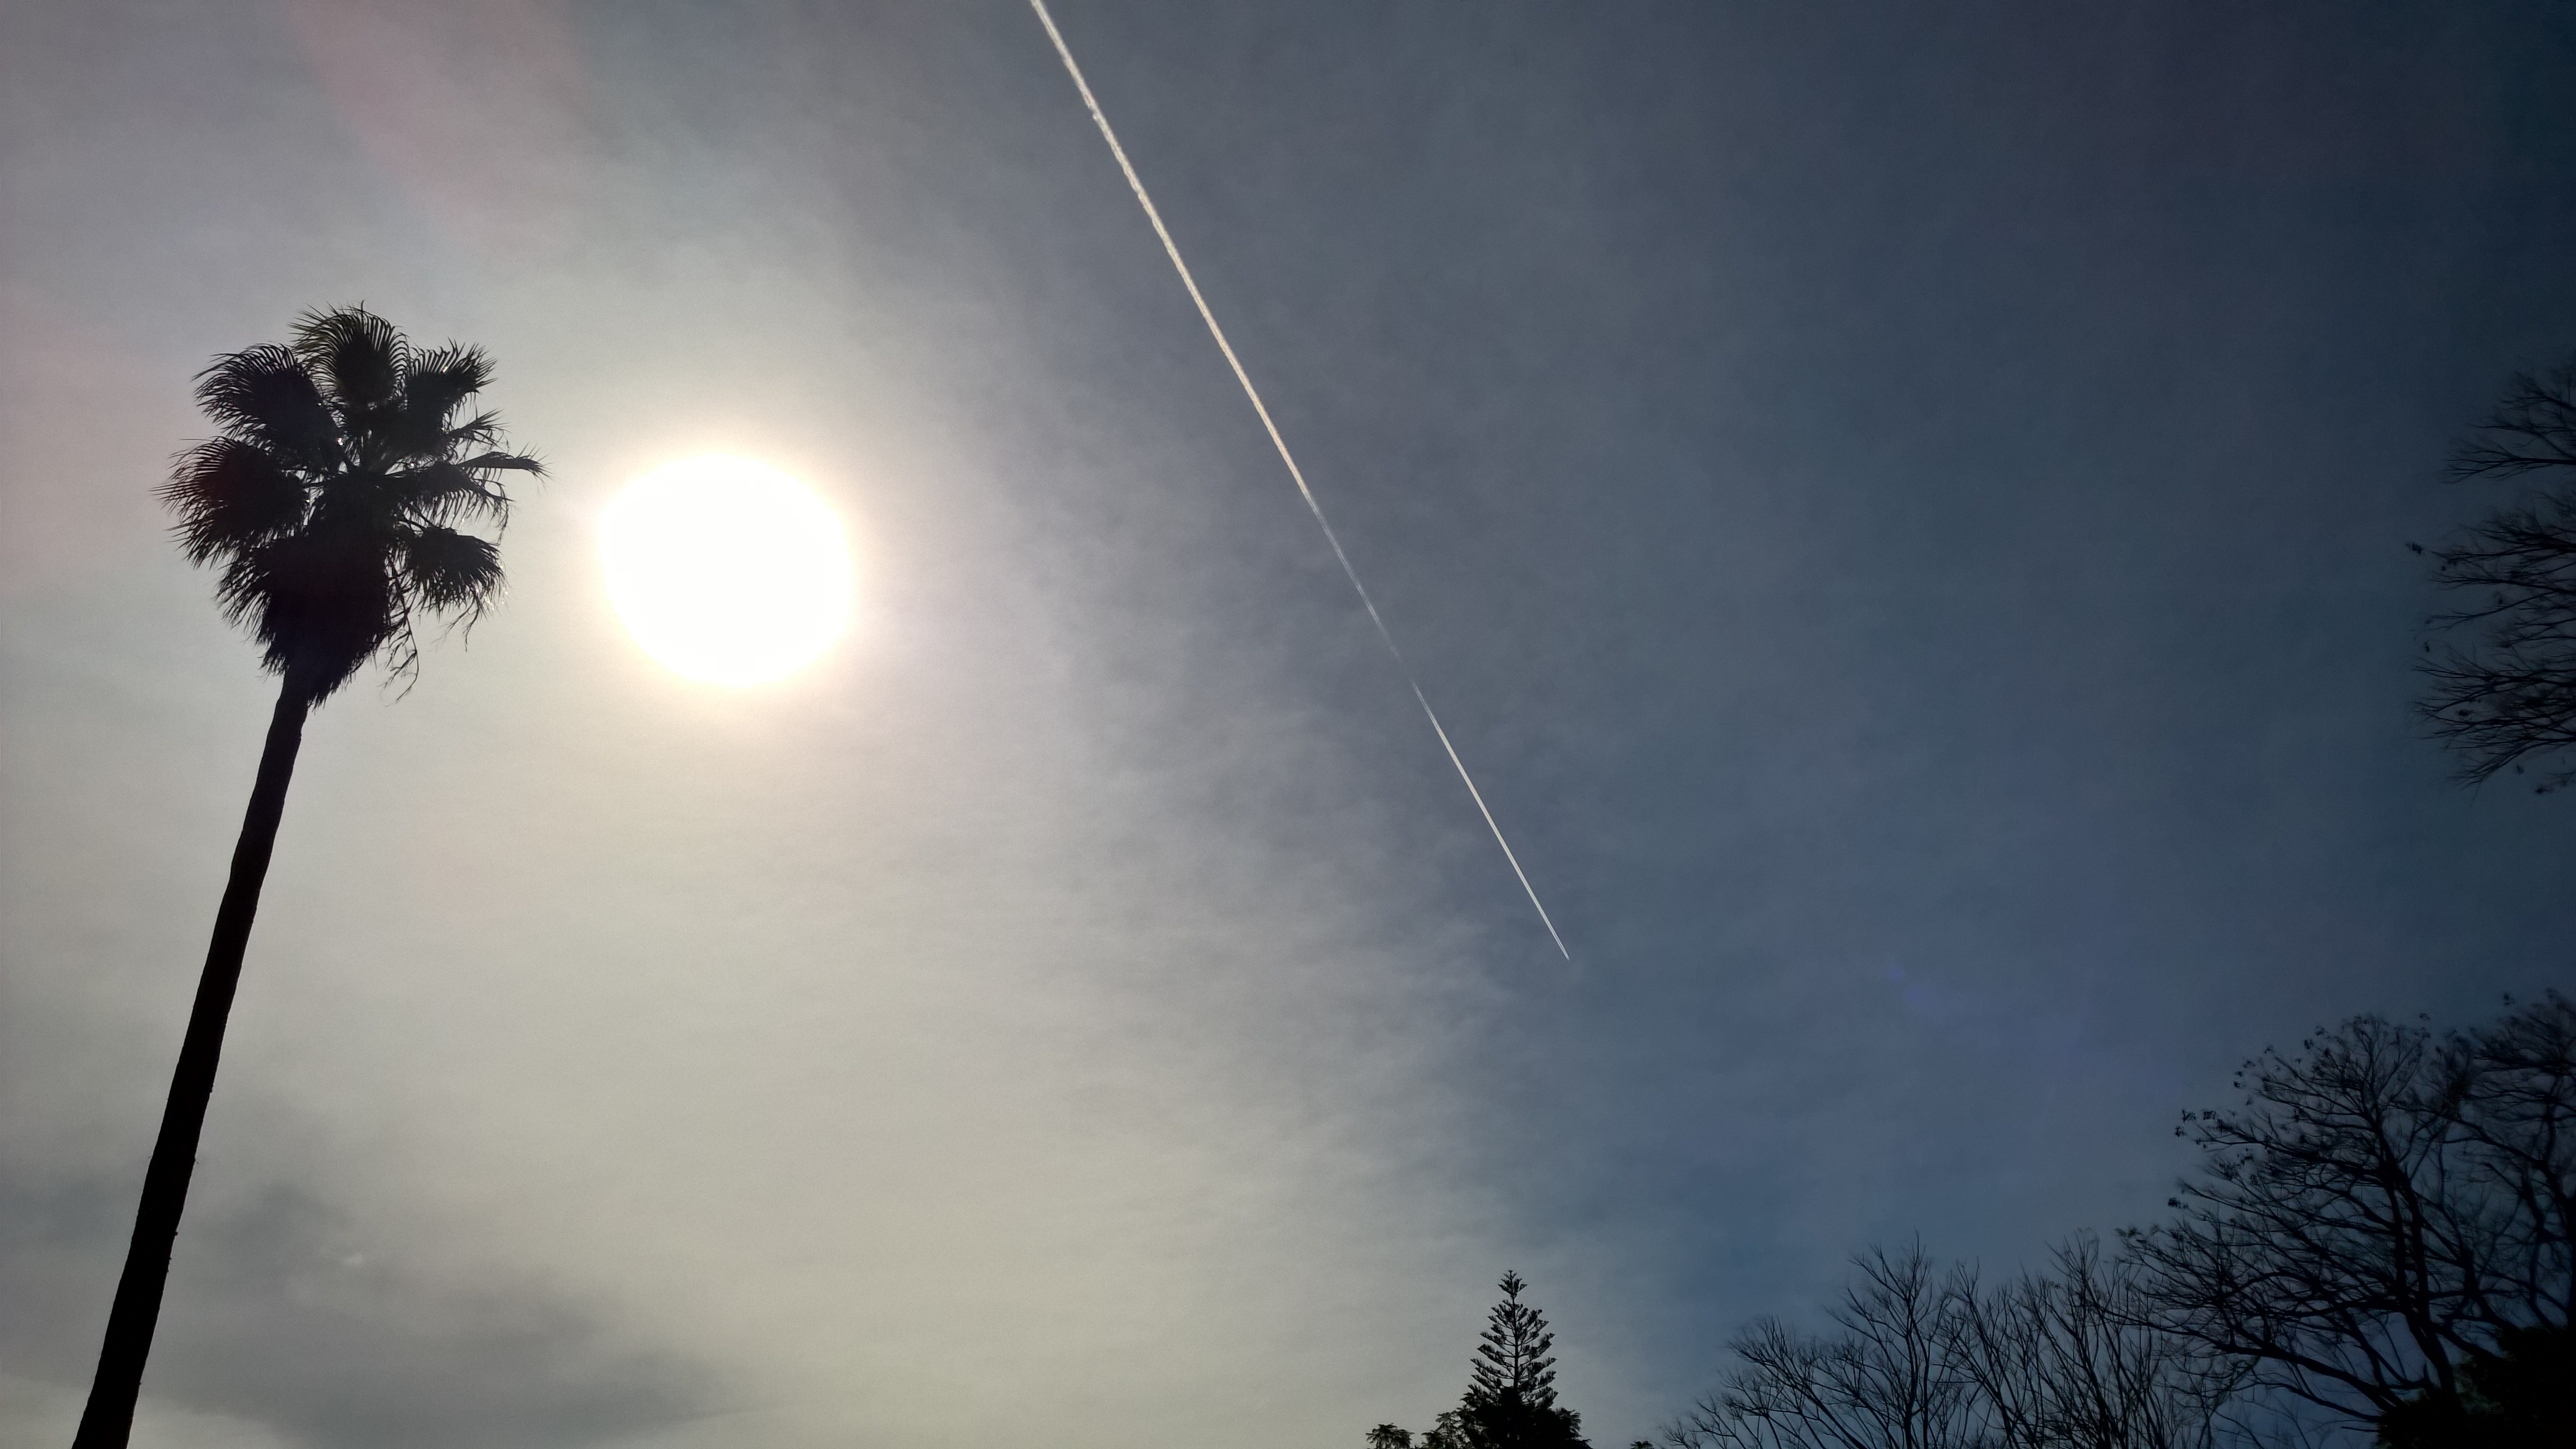 Sky Contrail Airplane Nature 5376x3024